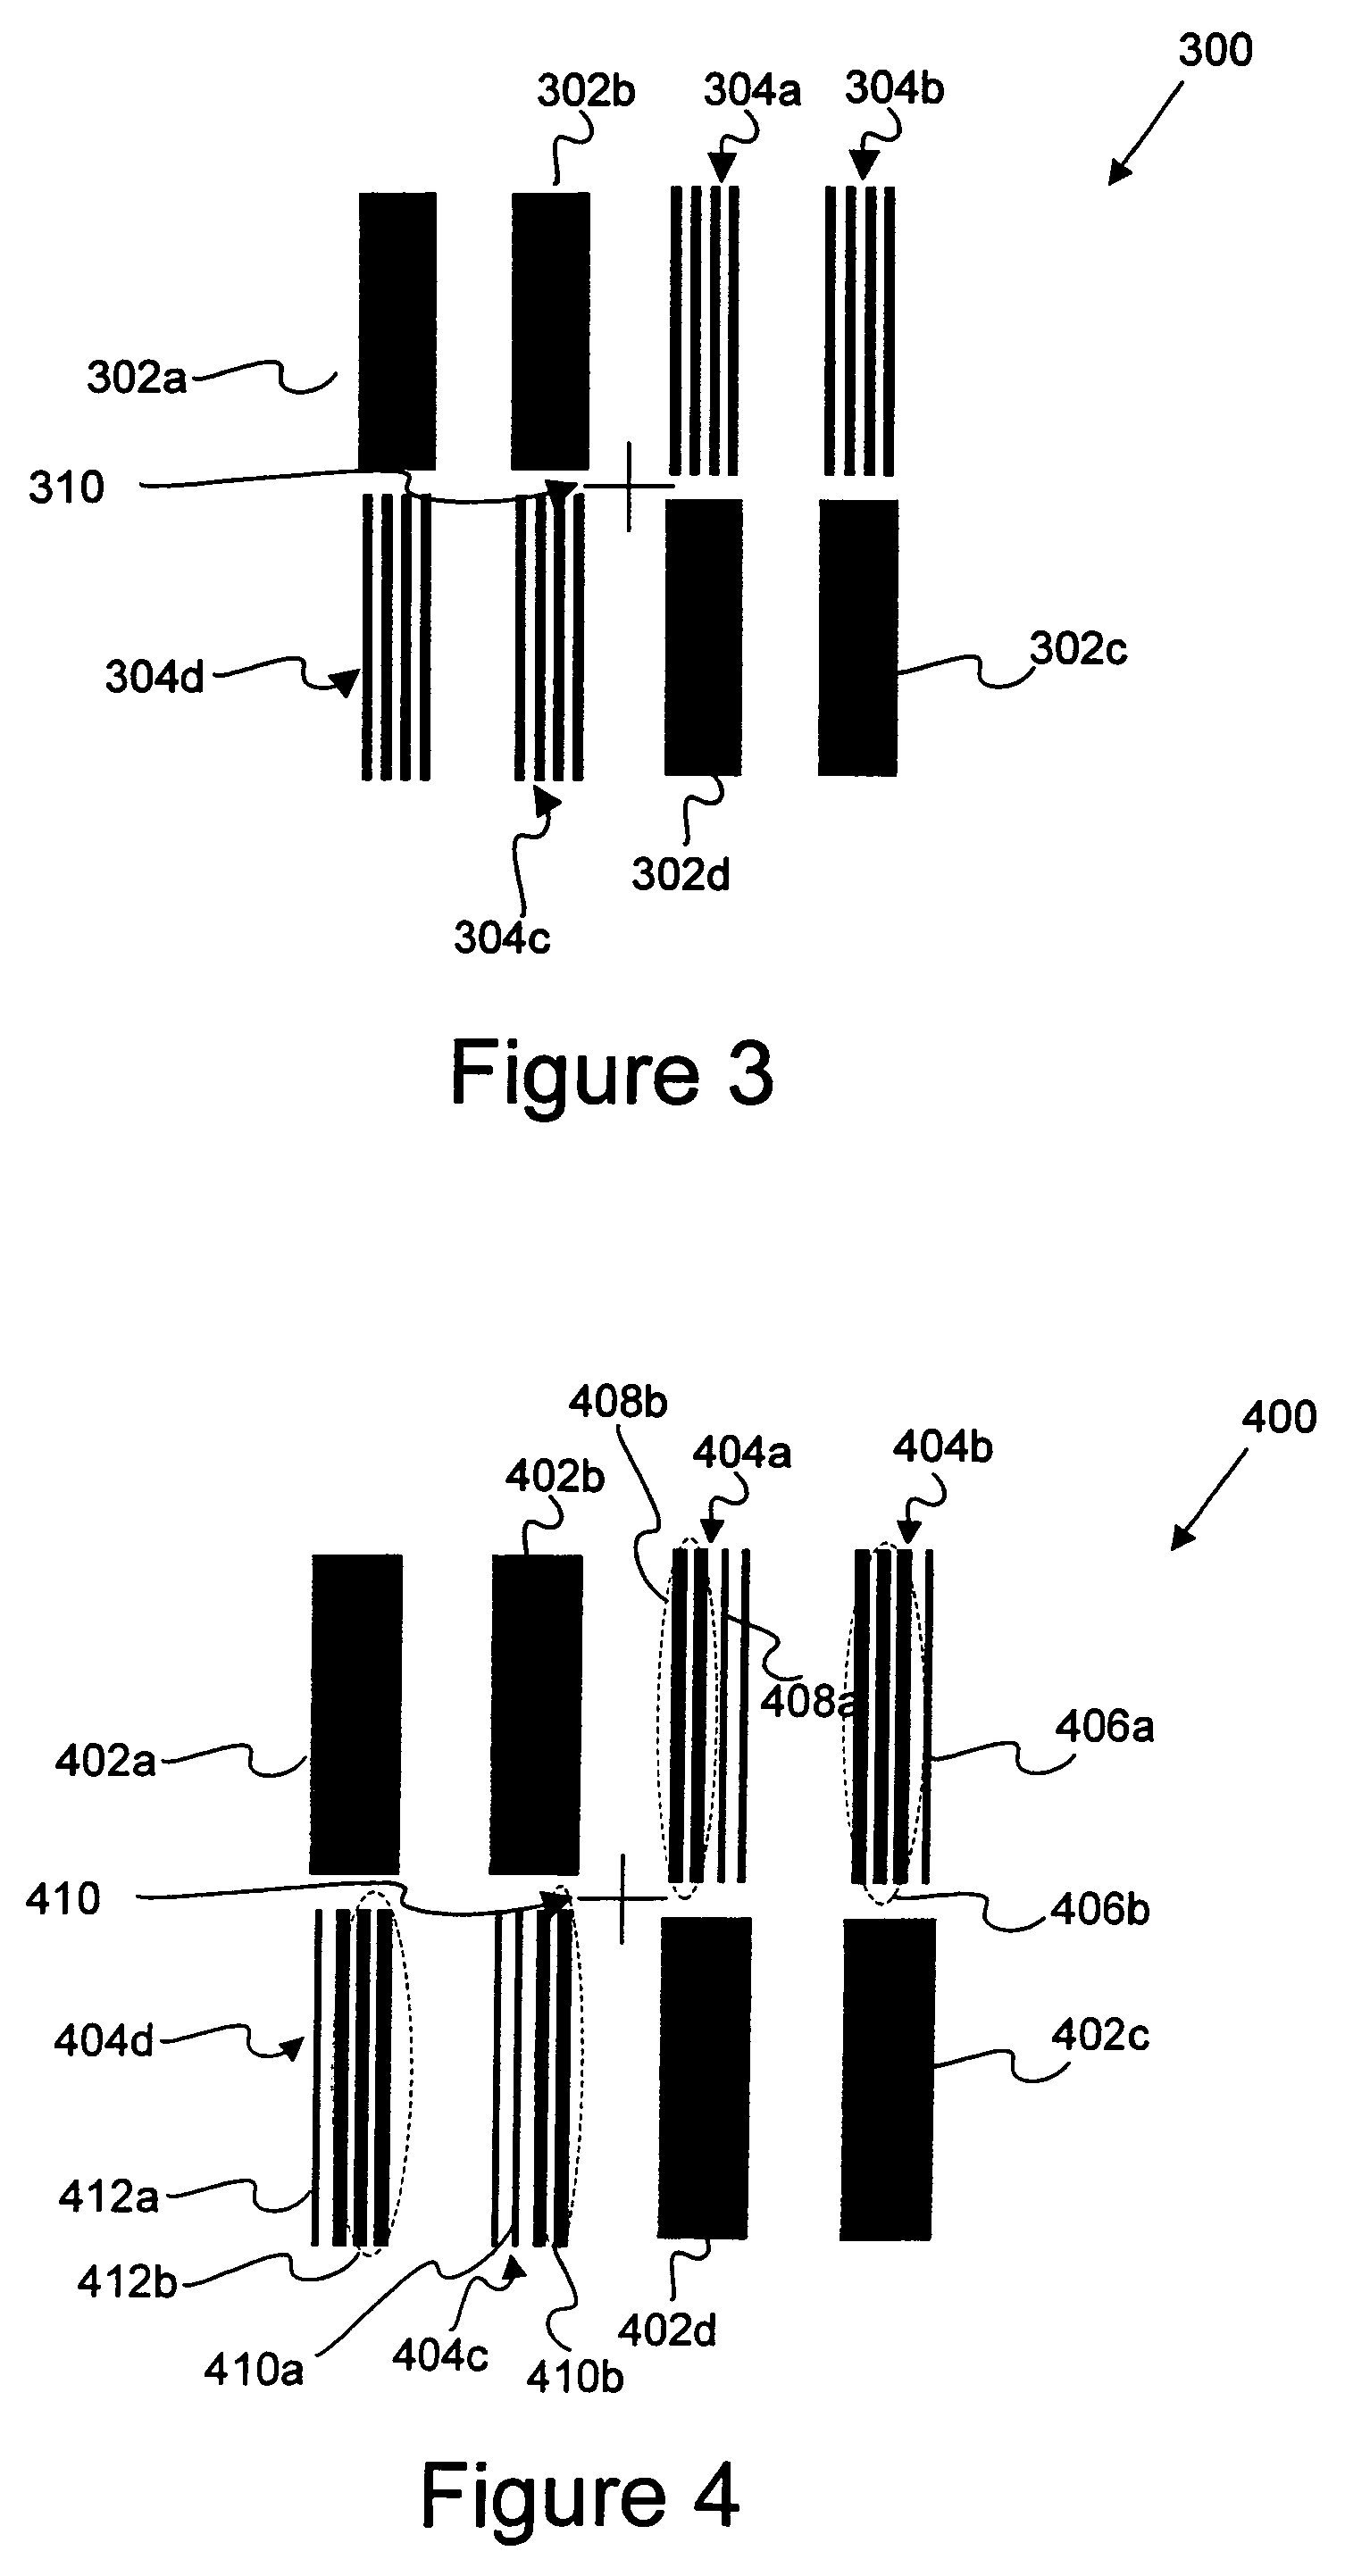 Apparatus and methods for optically monitoring the fidelity of patterns produced by photolitographic tools